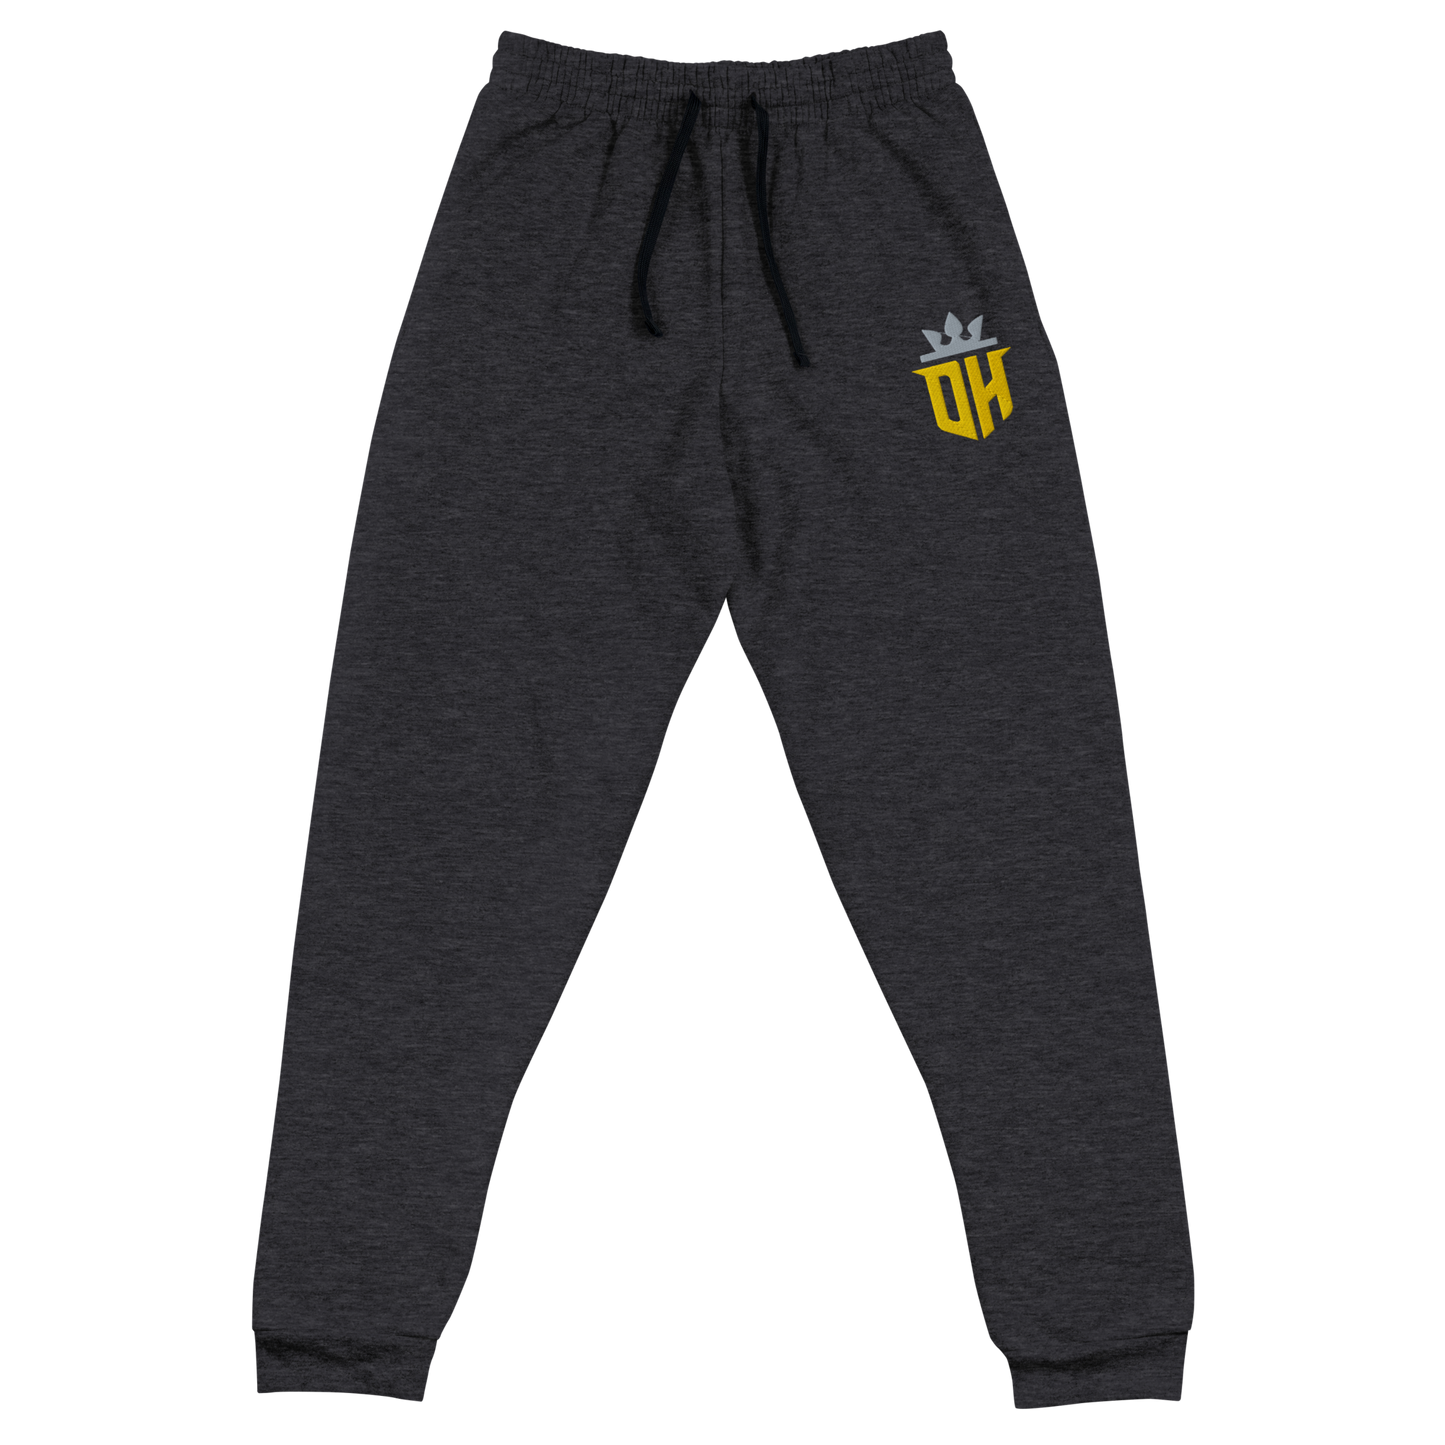 DEACON HILL EMBROIDERED JOGGERS